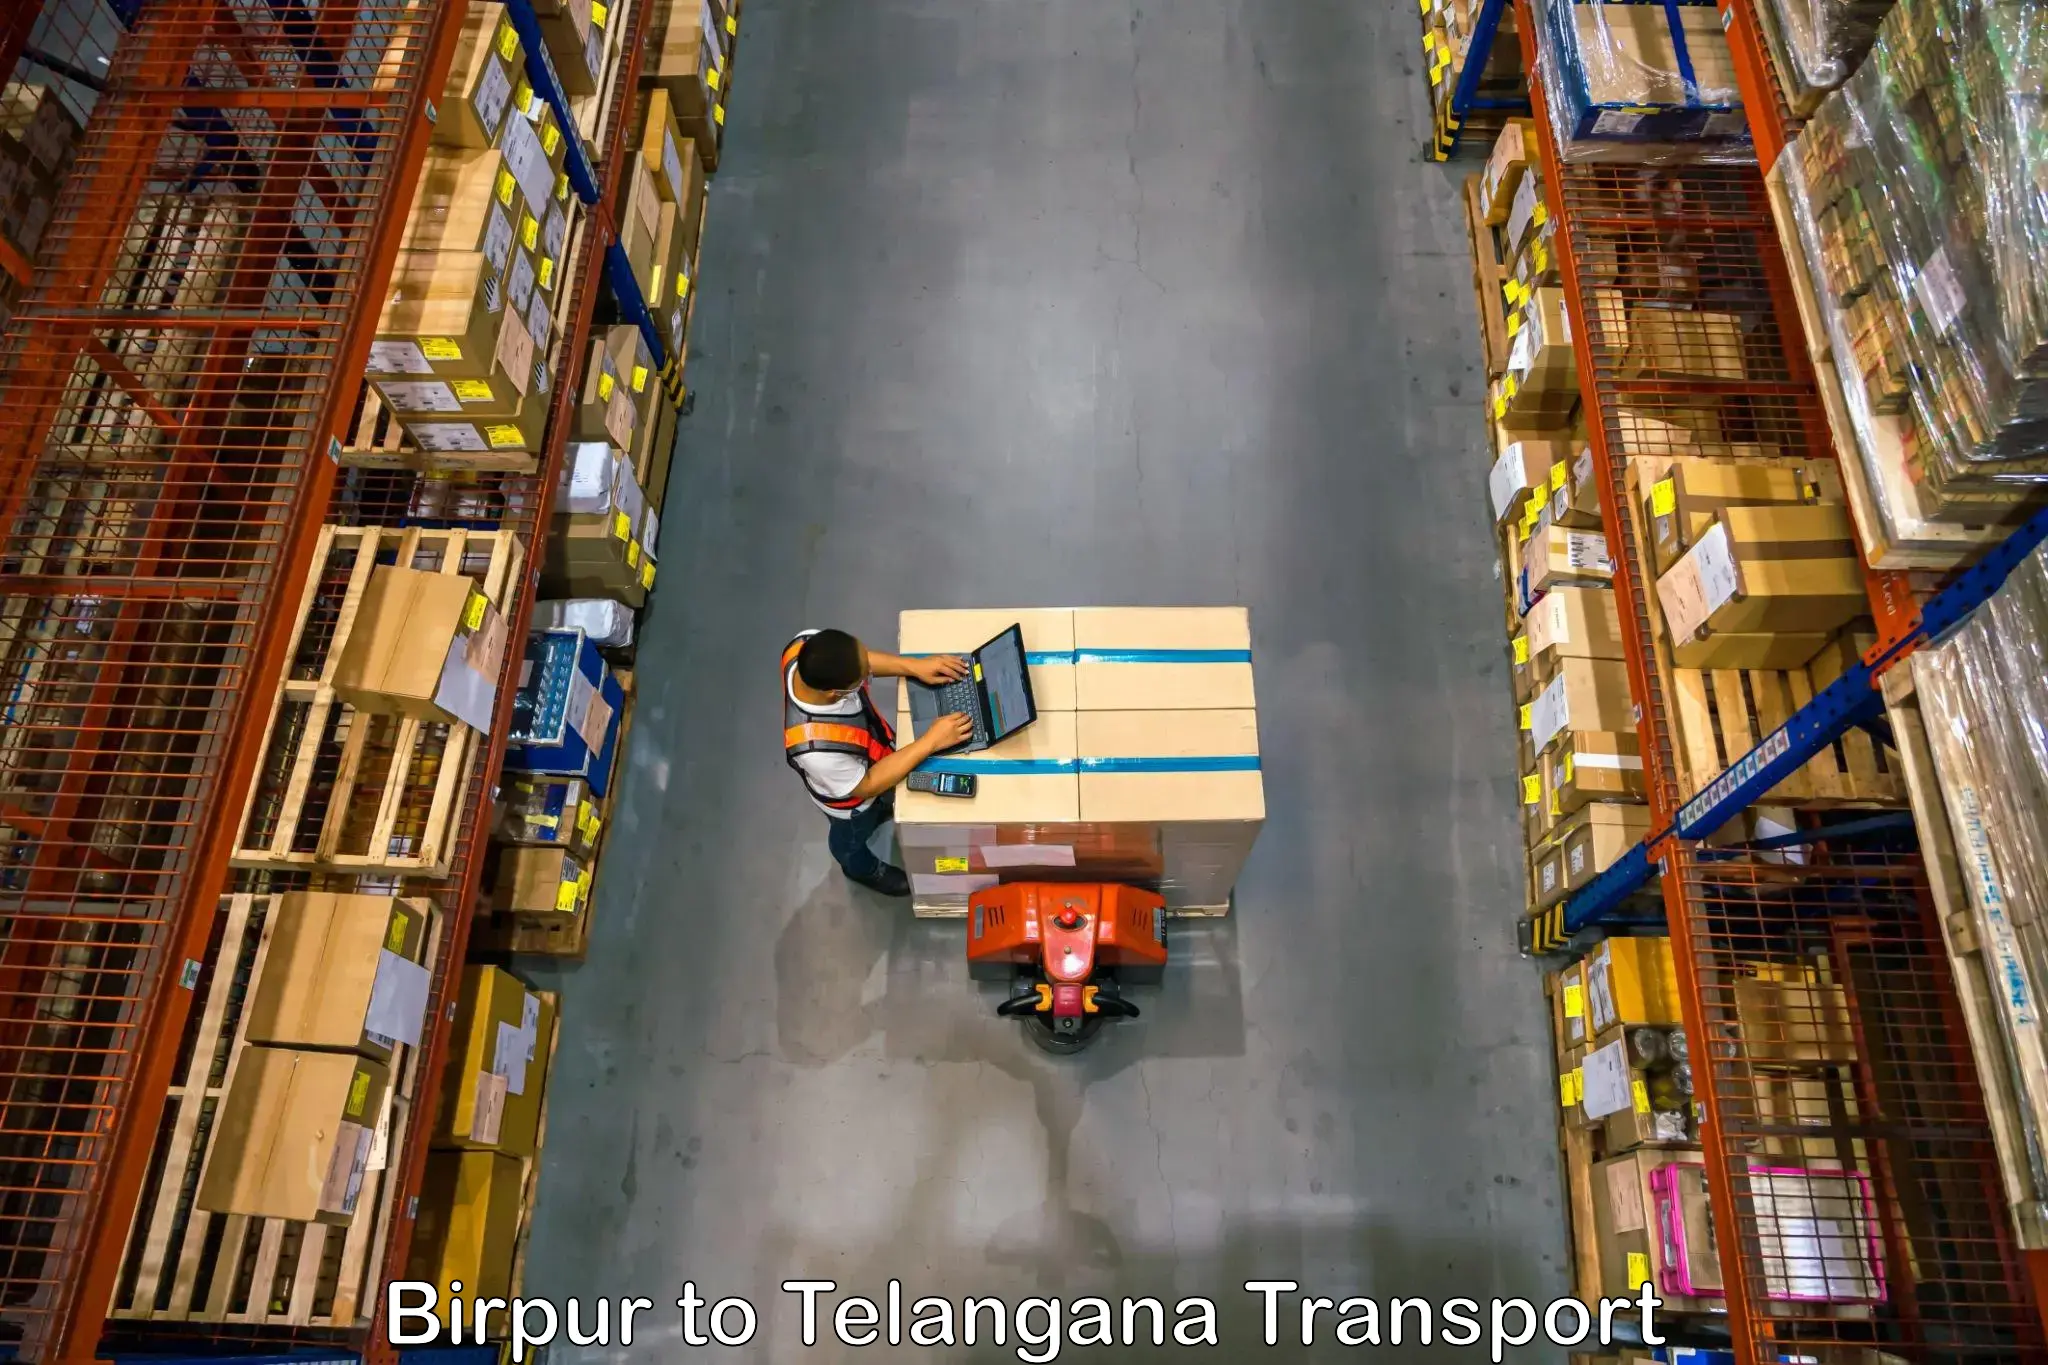 Container transport service Birpur to Shankarpalle